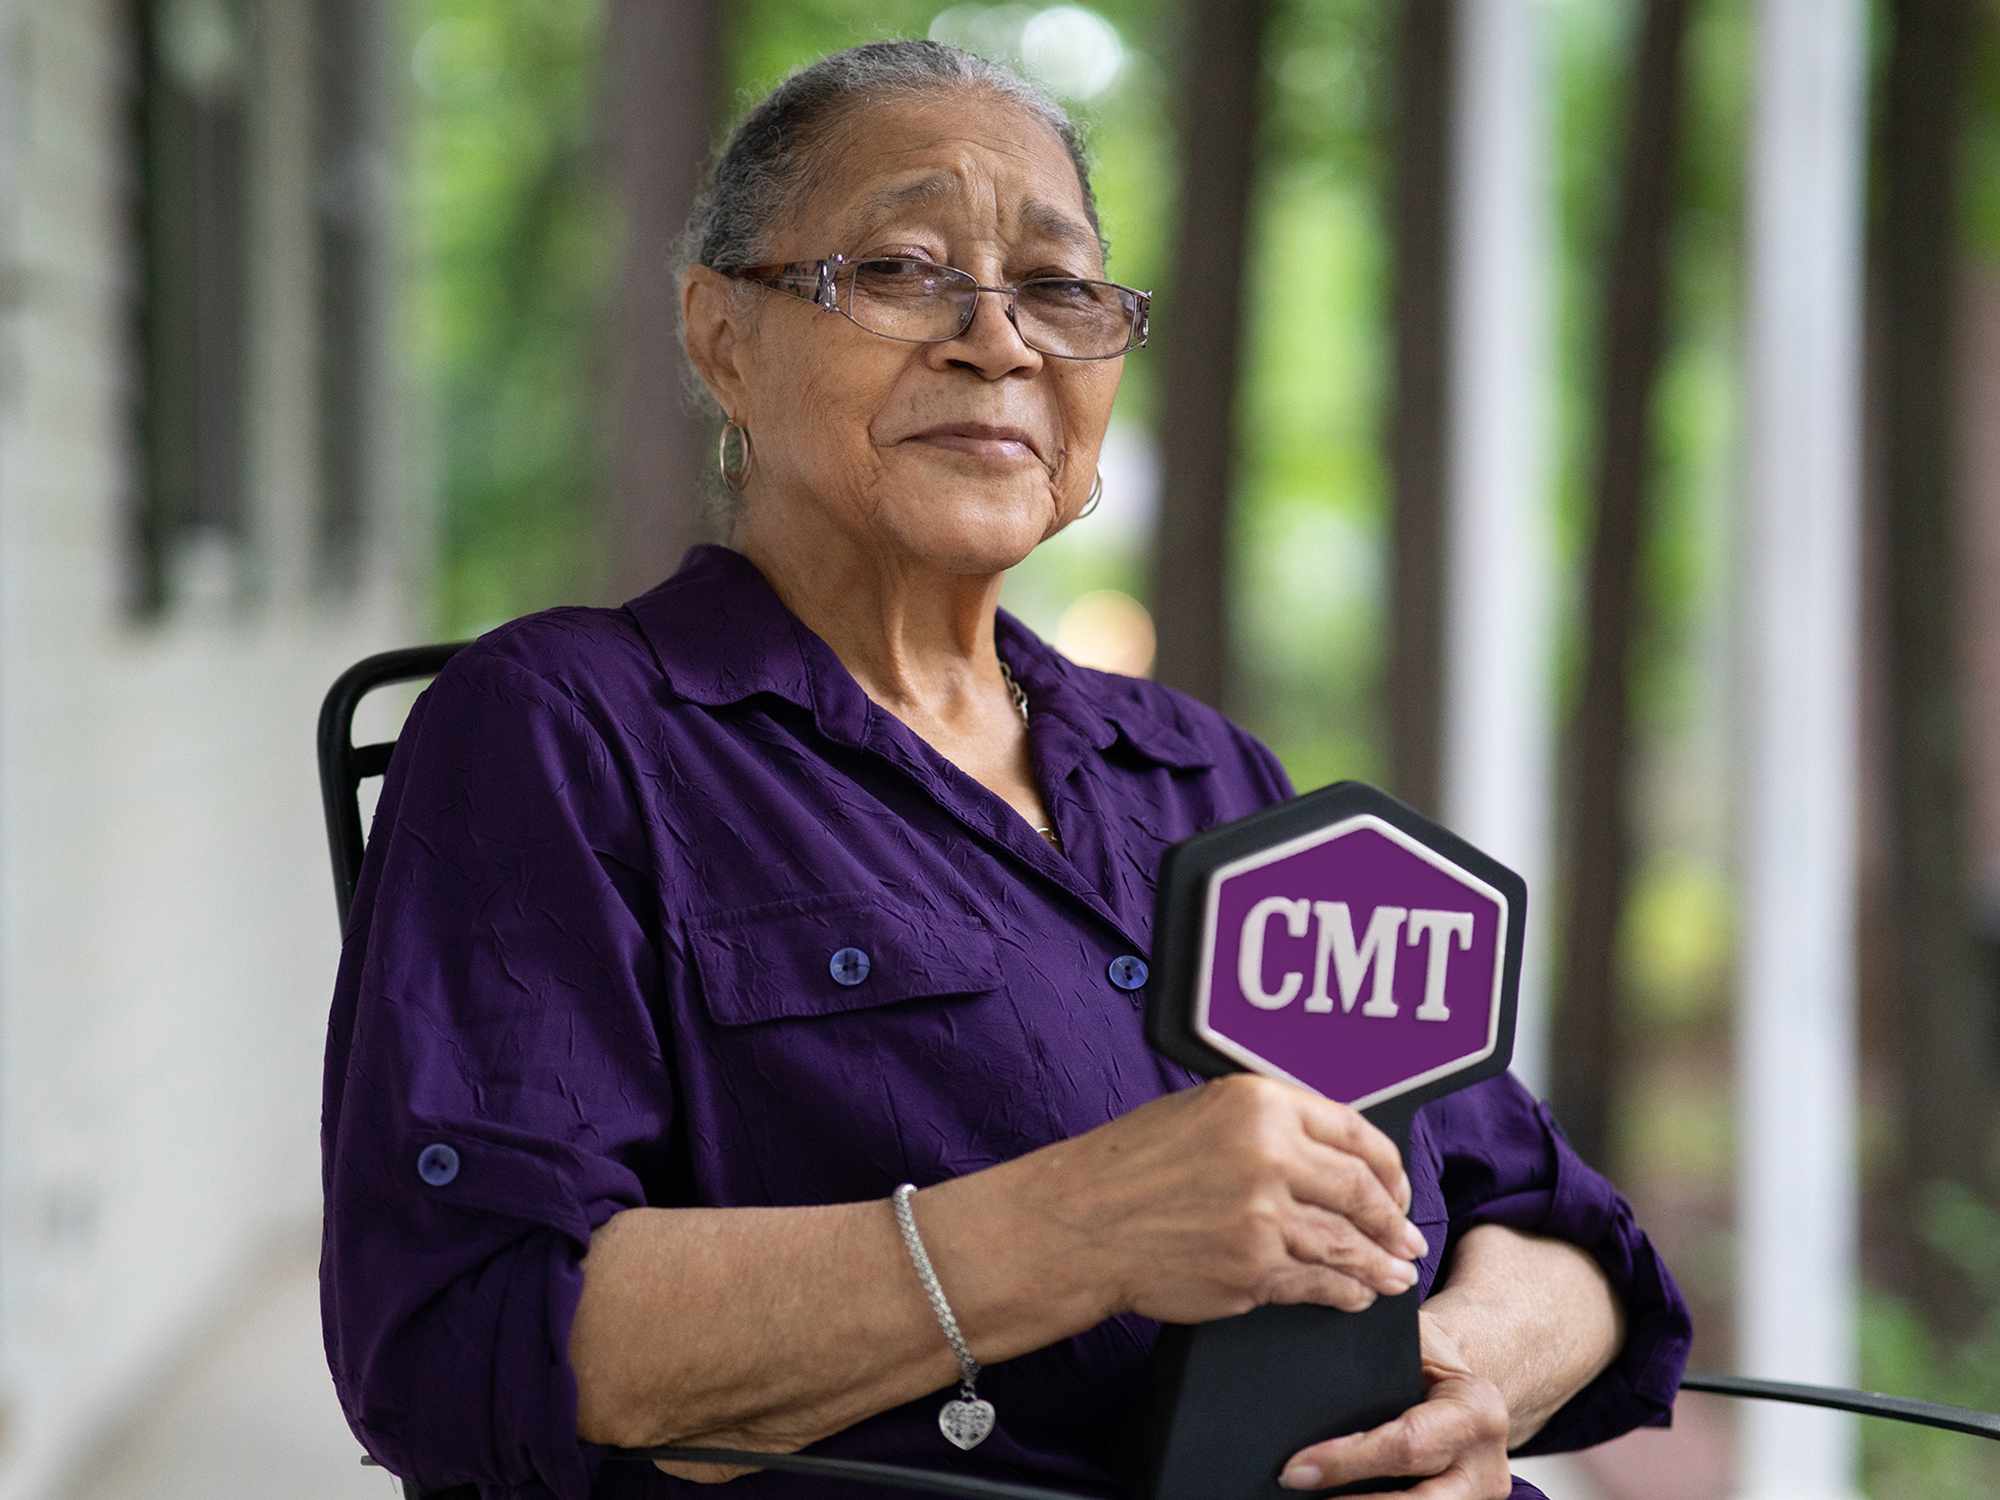 Linda Martell poses with an award for the 2021 CMT Music Awards.